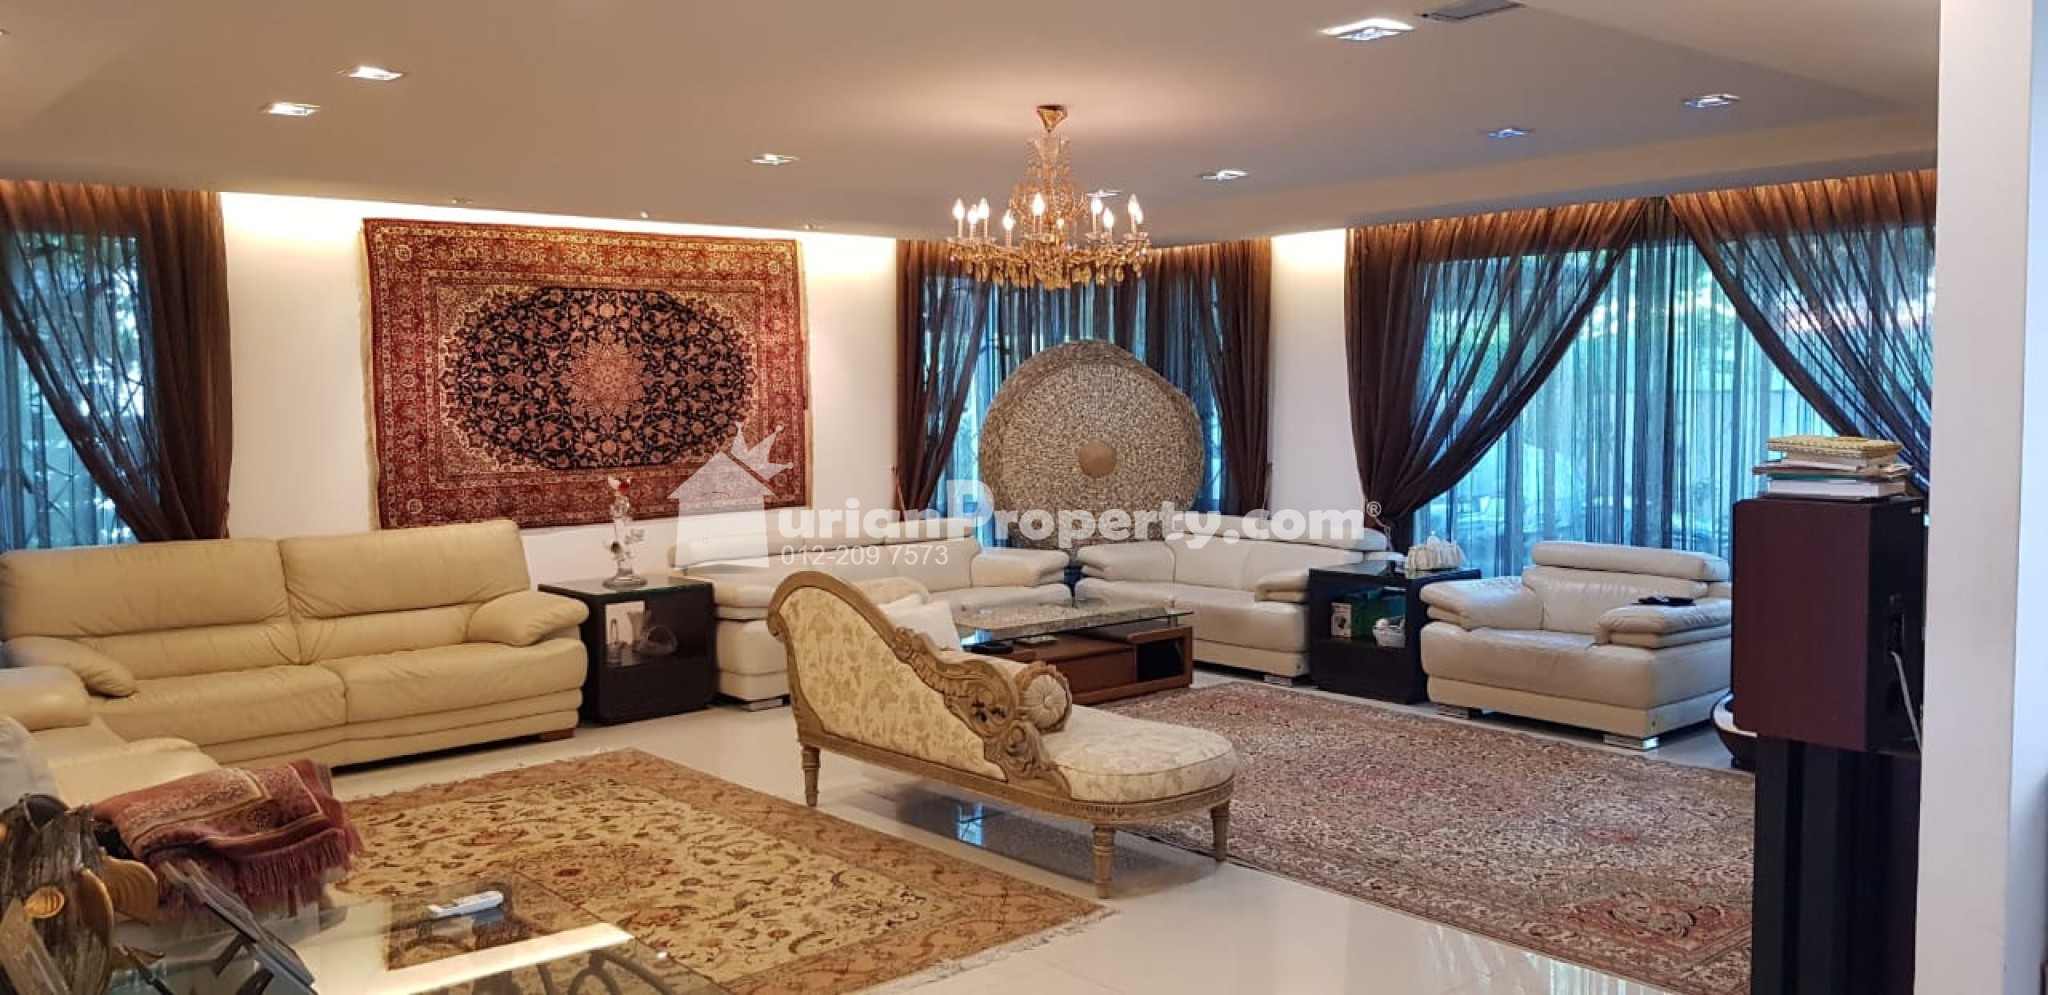 Bungalow House For Sale at Damansara Heights